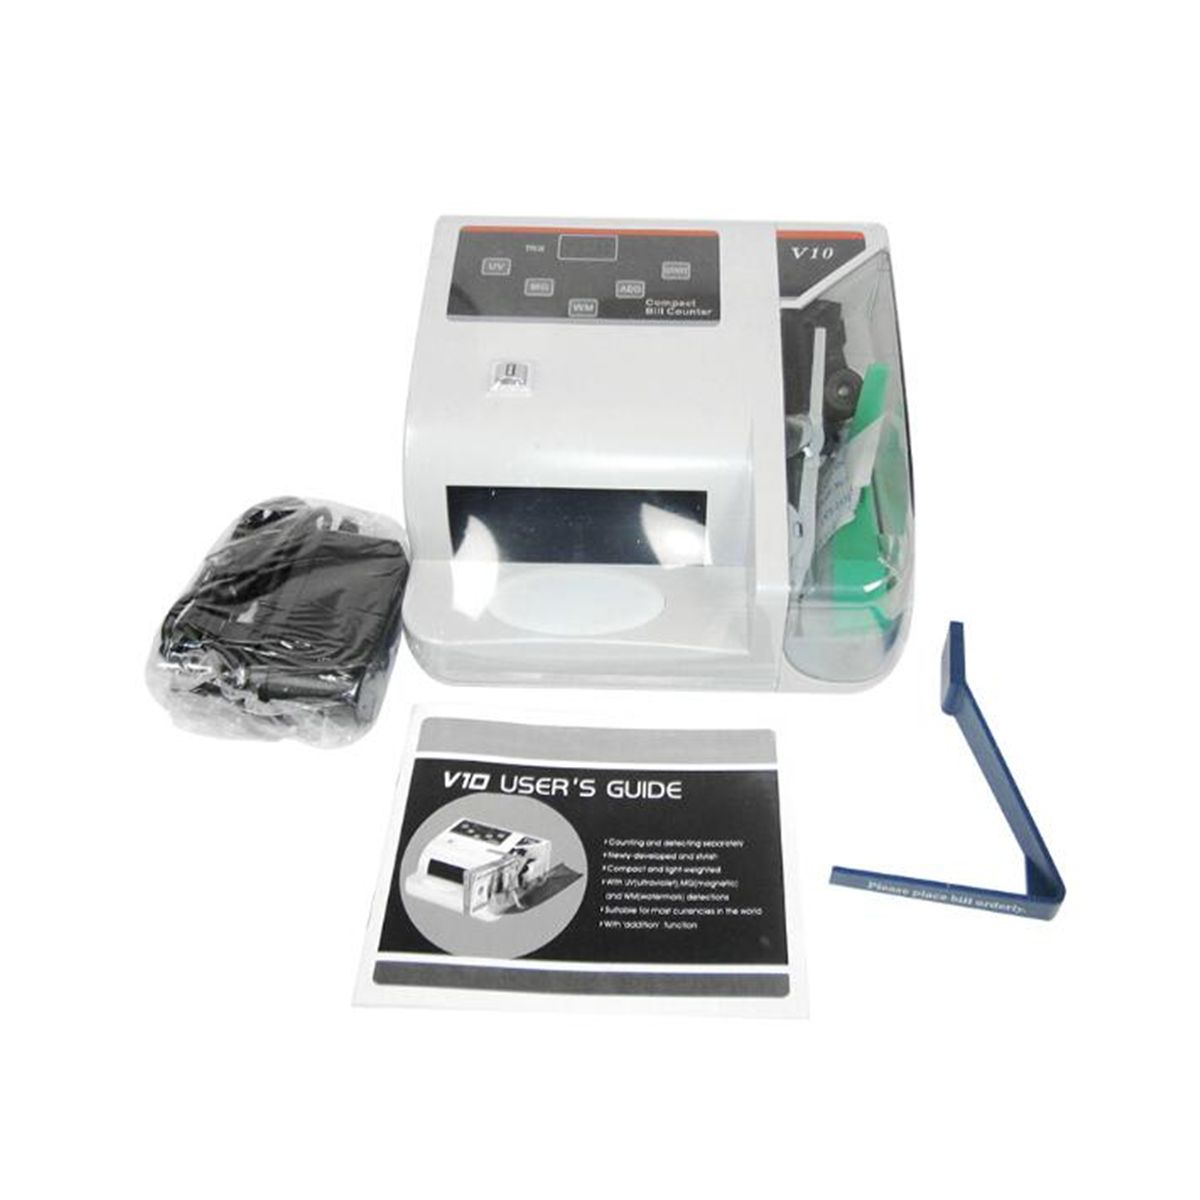 Portable-Money-Bill-Cash-Counter-Bank-Currency-Counting-Detector-UV-MG-Machine-1363088